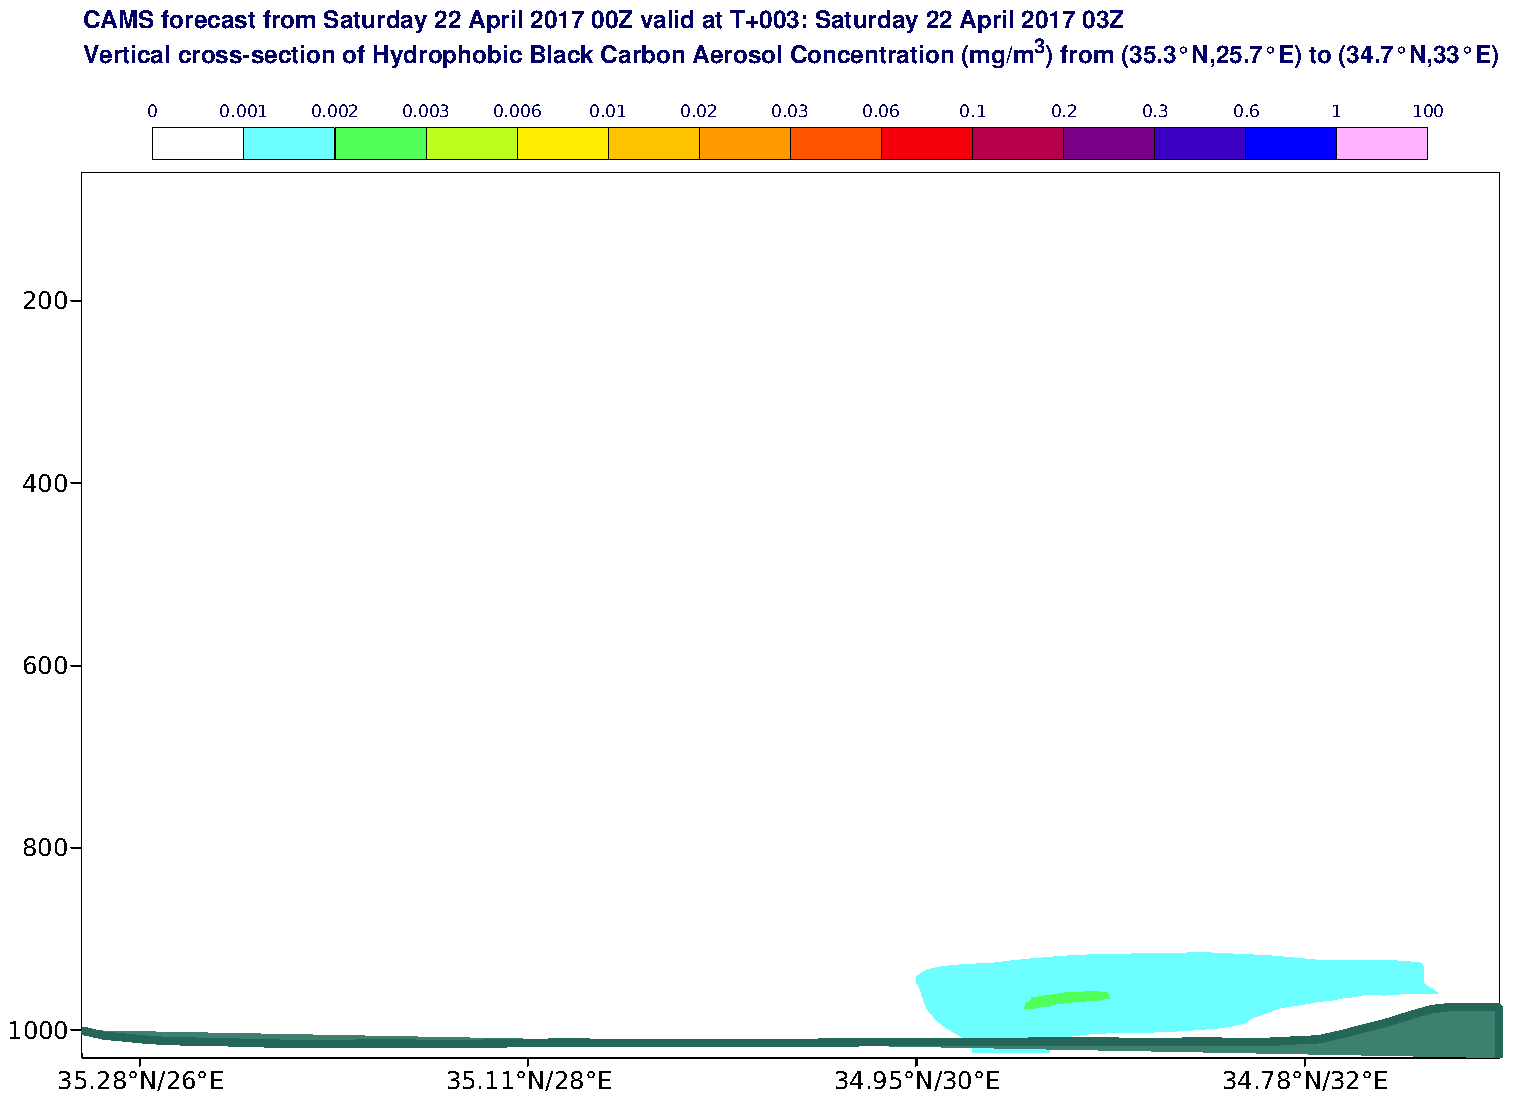 Vertical cross-section of Hydrophobic Black Carbon Aerosol Concentration (mg/m3) valid at T3 - 2017-04-22 03:00